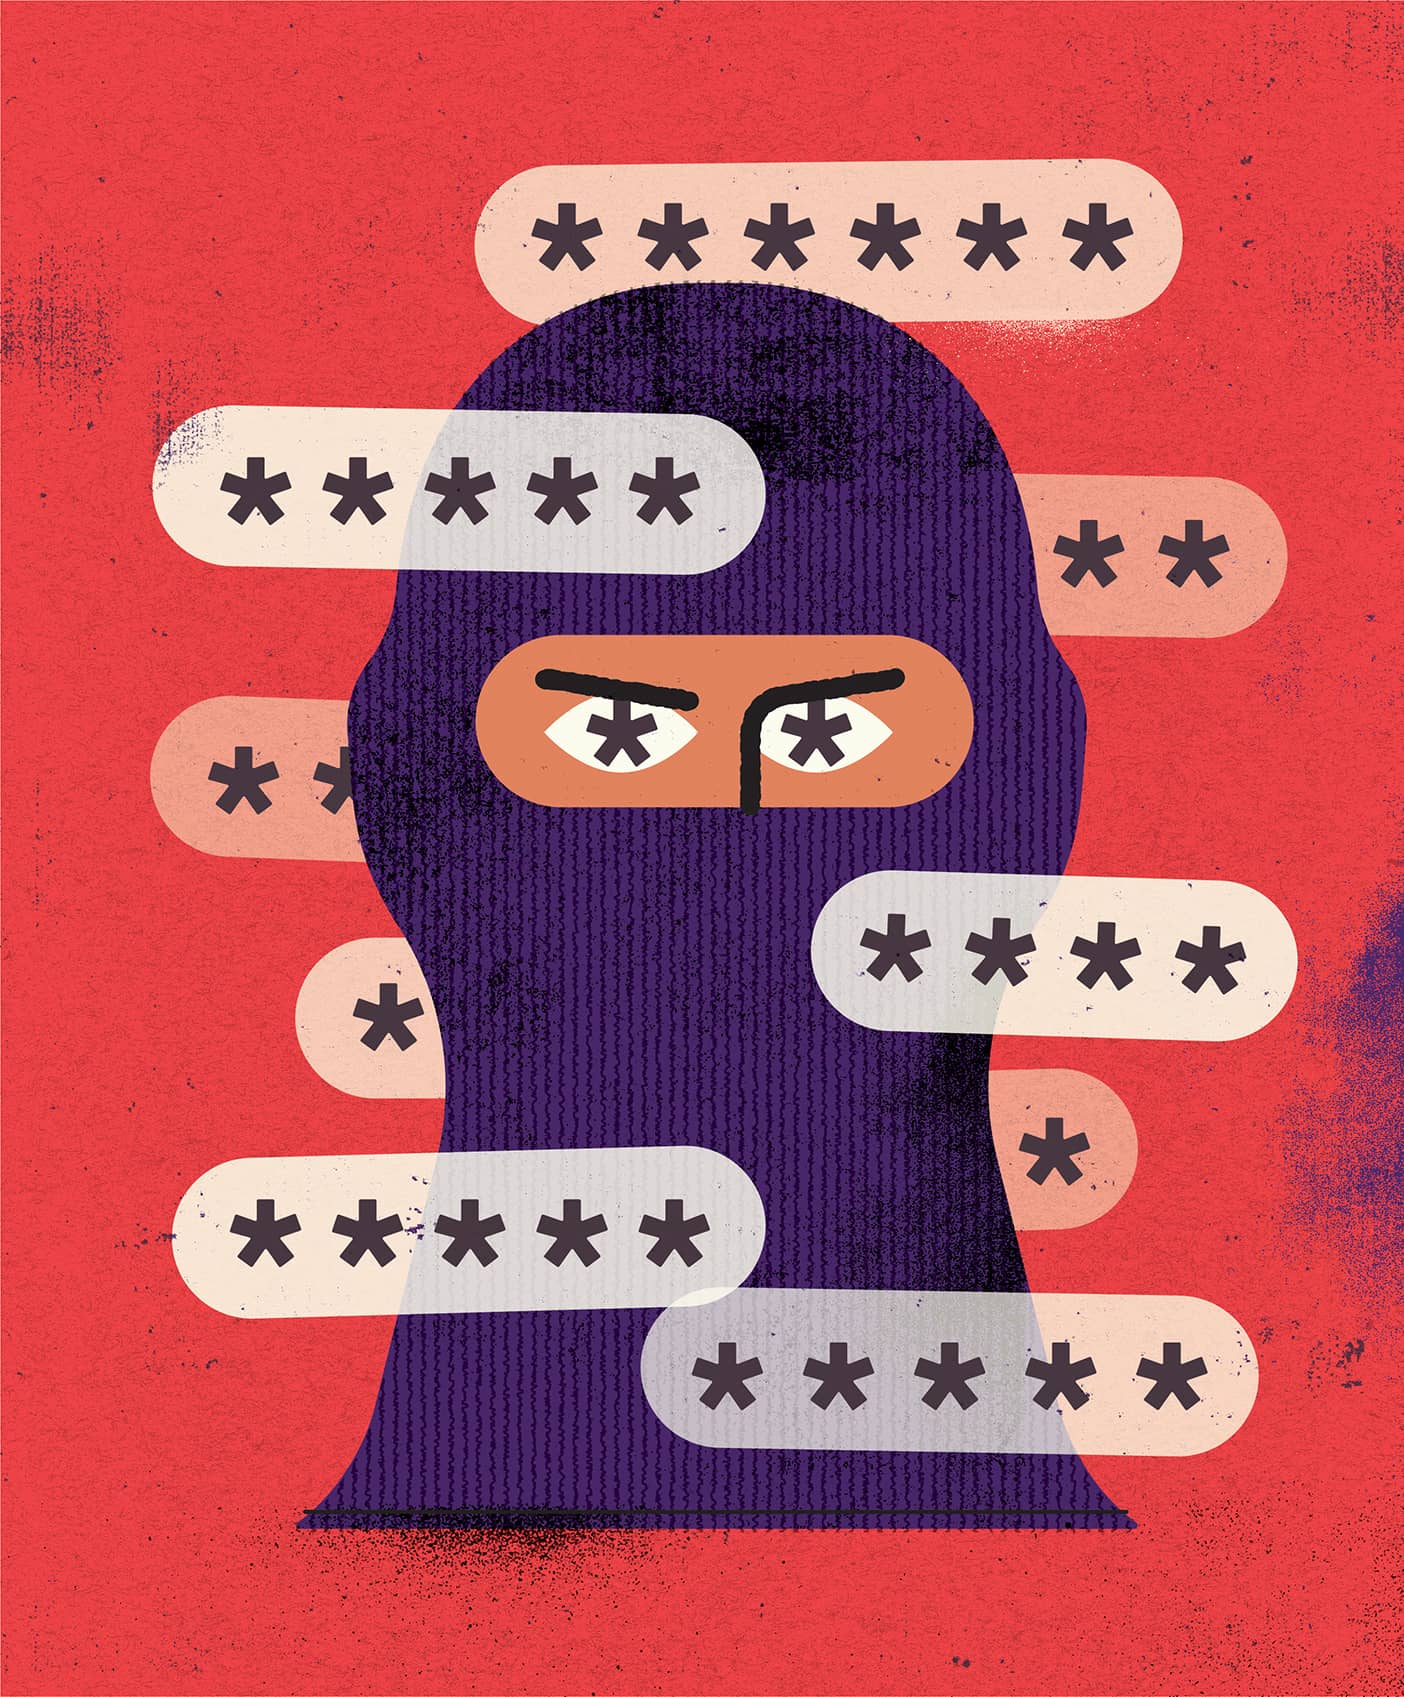 An illustration of a man in a ski mask with a bunch of lines of asterisks floating around his head representing passwords.